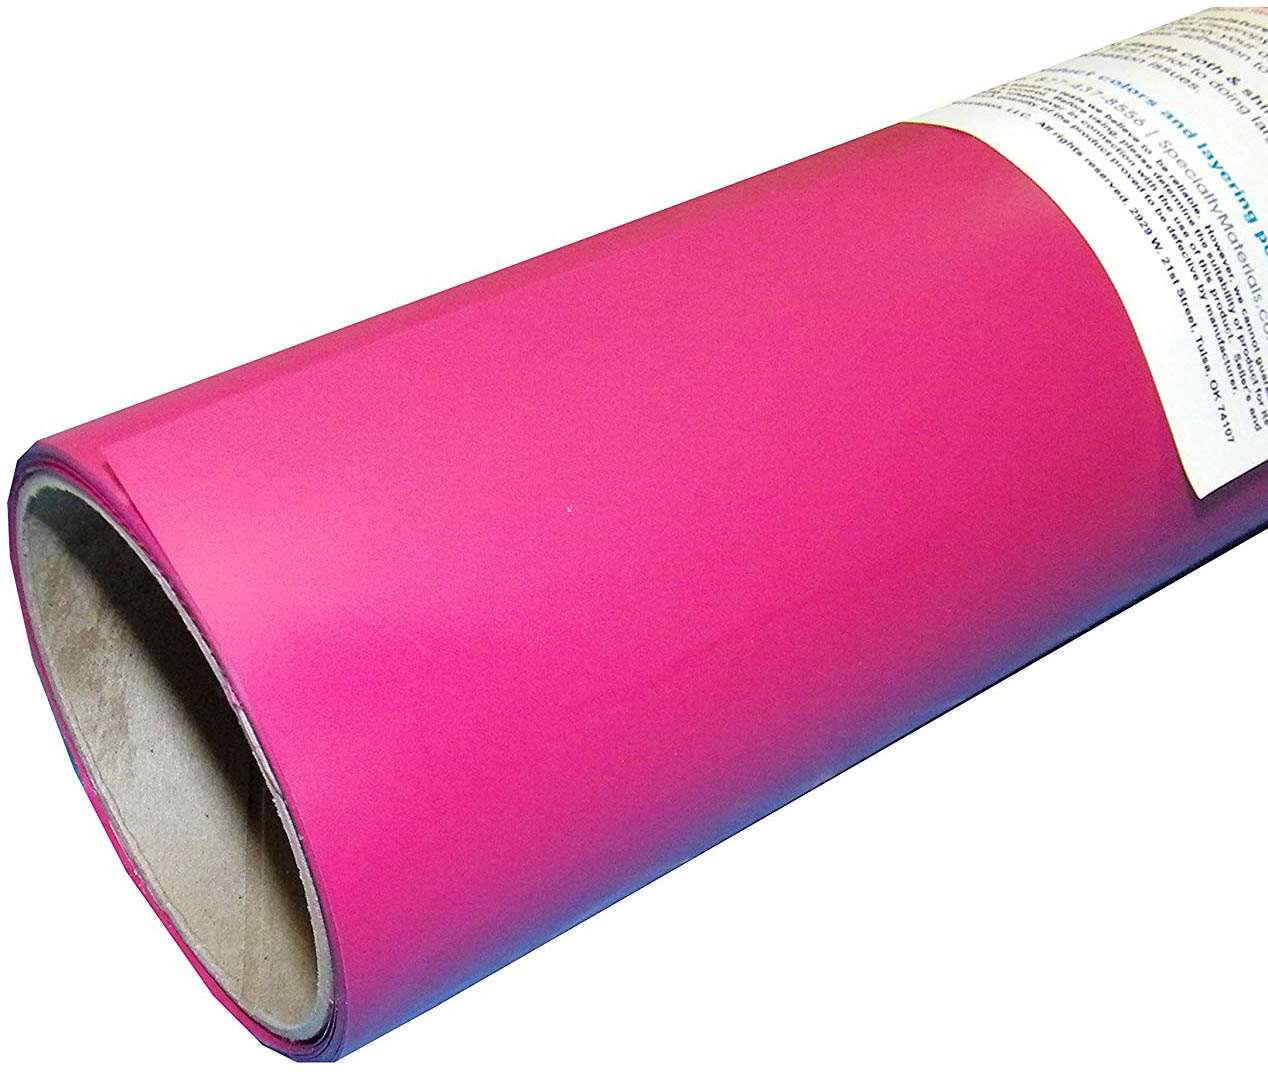 Specialty Materials ThermoFlexPLUS Hot Pink - Specialty Materials ThermoFlex PLUS Heat Transfer Film